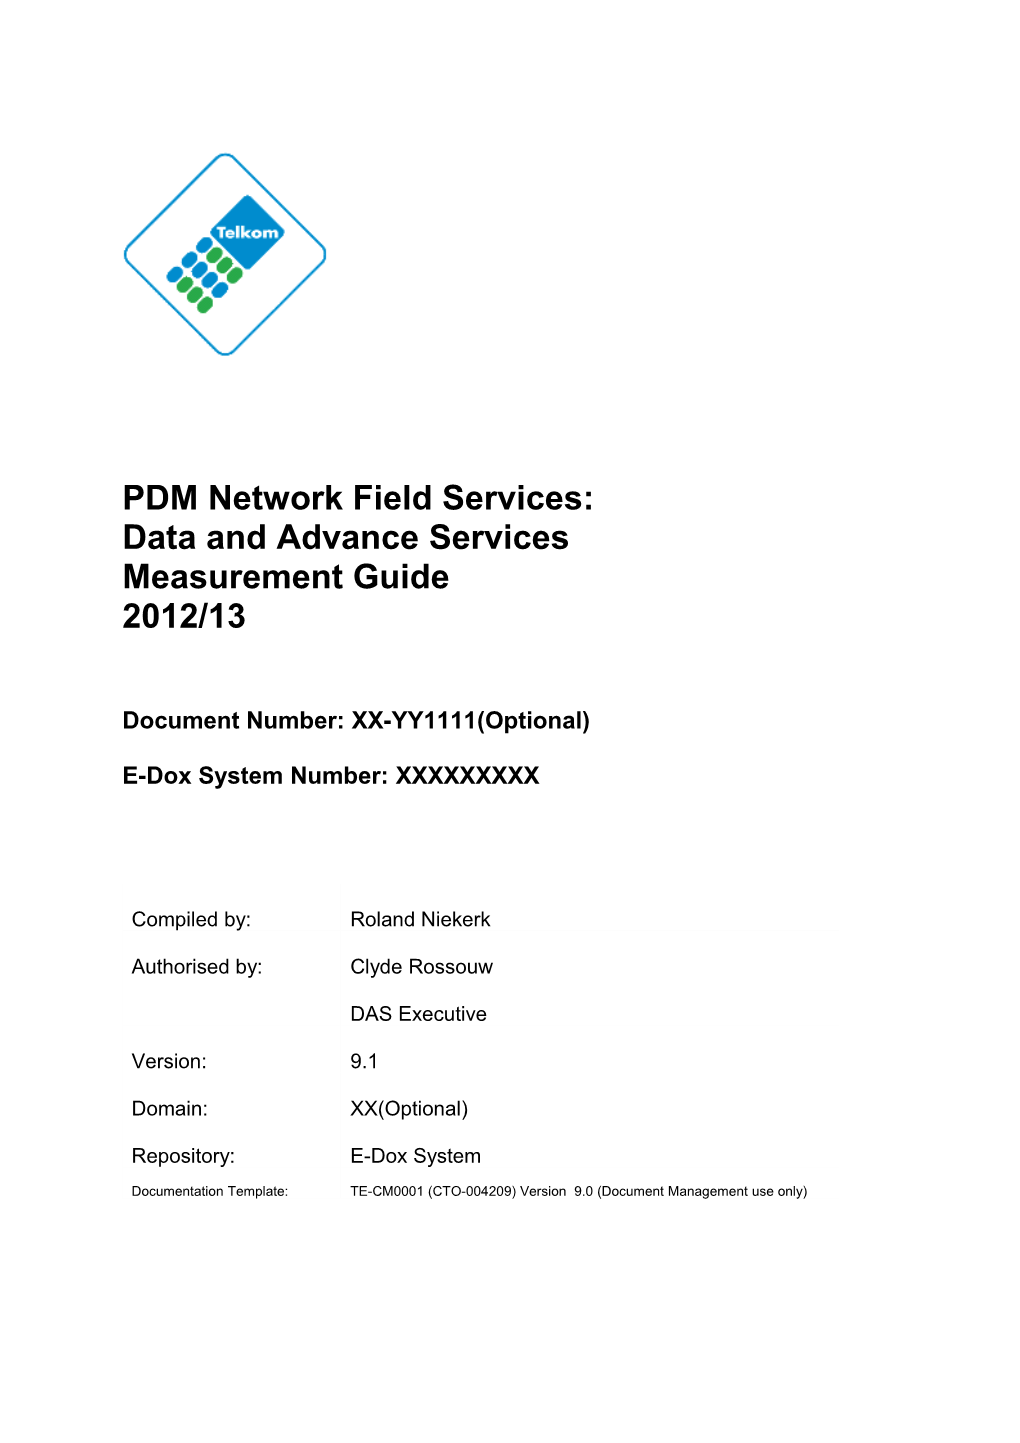 PDM Network Field Services